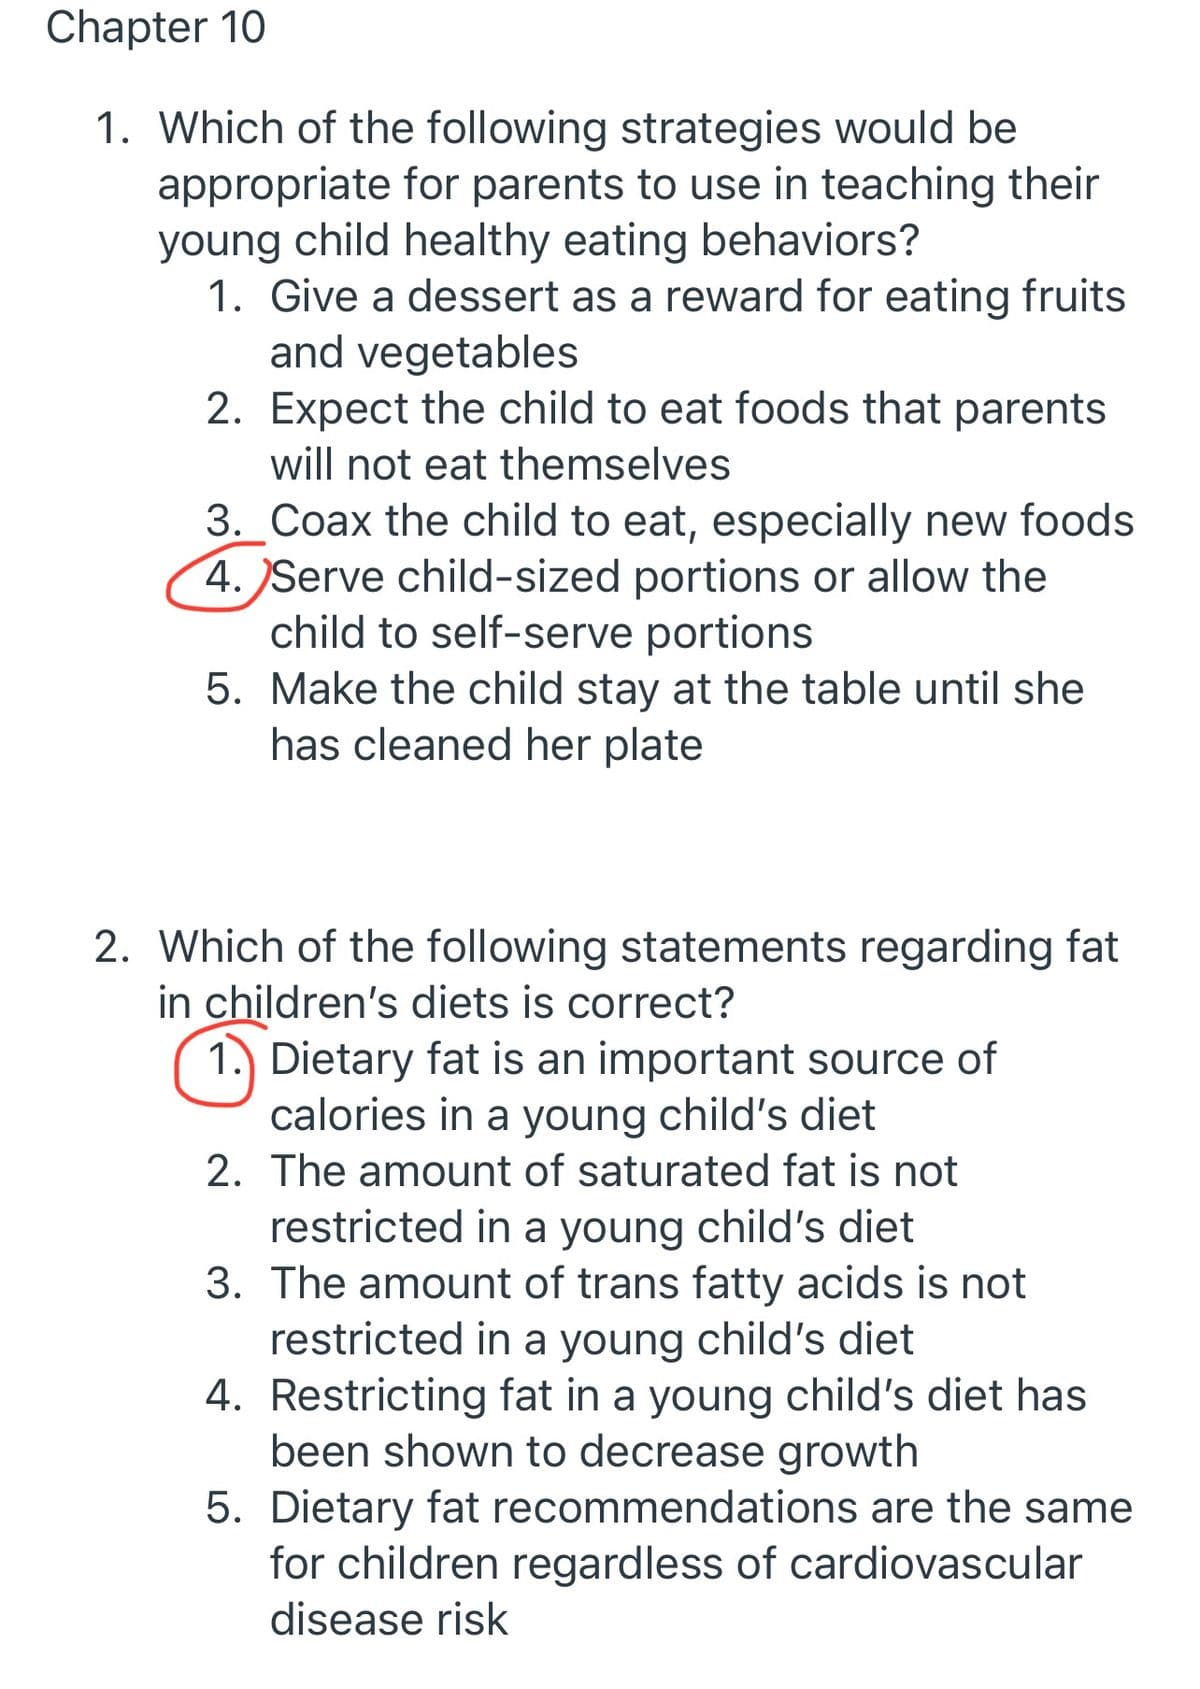 Chapter 10
1. Which of the following strategies would be
appropriate for parents to use in teaching their
young child healthy eating behaviors?
1. Give a dessert as a reward for eating fruits
and vegetables
2. Expect the child to eat foods that parents
will not eat themselves
3. Coax the child to eat, especially new foods
4. Serve child-sized portions or allow the
child to self-serve portions
5. Make the child stay at the table until she
has cleaned her plate
2. Which of the following statements regarding fat
in children's diets is correct?
1. Dietary fat is an important source of
calories in a young child's diet
2. The amount of saturated fat is not
restricted in a young child's diet
3. The amount of trans fatty acids is not
restricted in a young child's diet
4. Restricting fat in a young child's diet has
been shown to decrease growth
5. Dietary fat recommendations are the same
for children regardless of cardiovascular
disease risk
